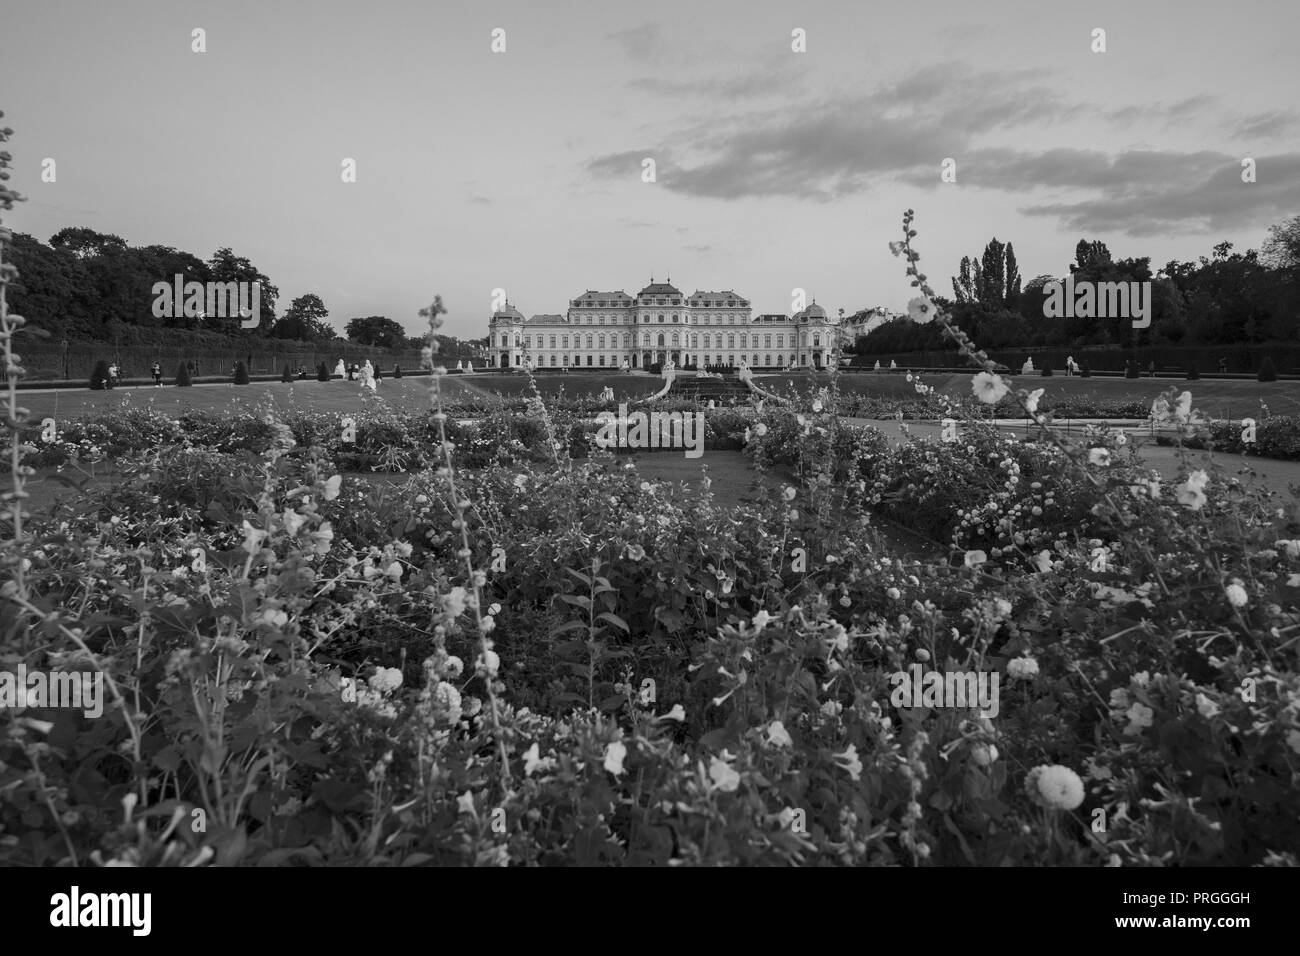 Schloss belvedere vienna Black and White Stock Photos & Images - Alamy